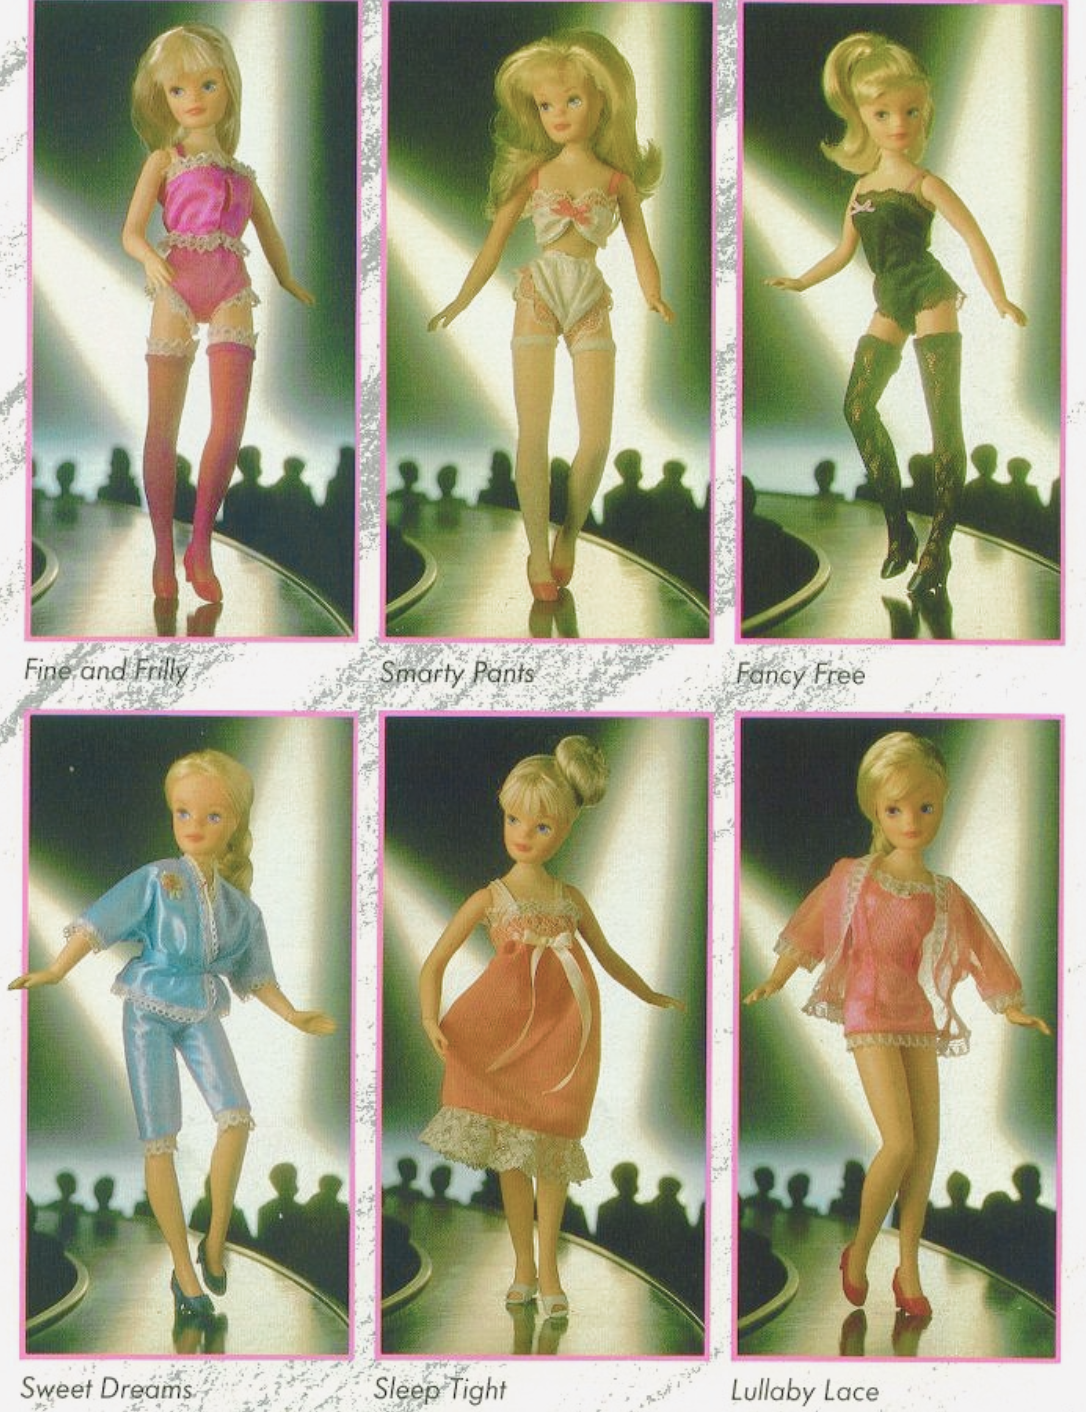 1987 Hasbro Sindy Fashion Doll Lingerie Collection